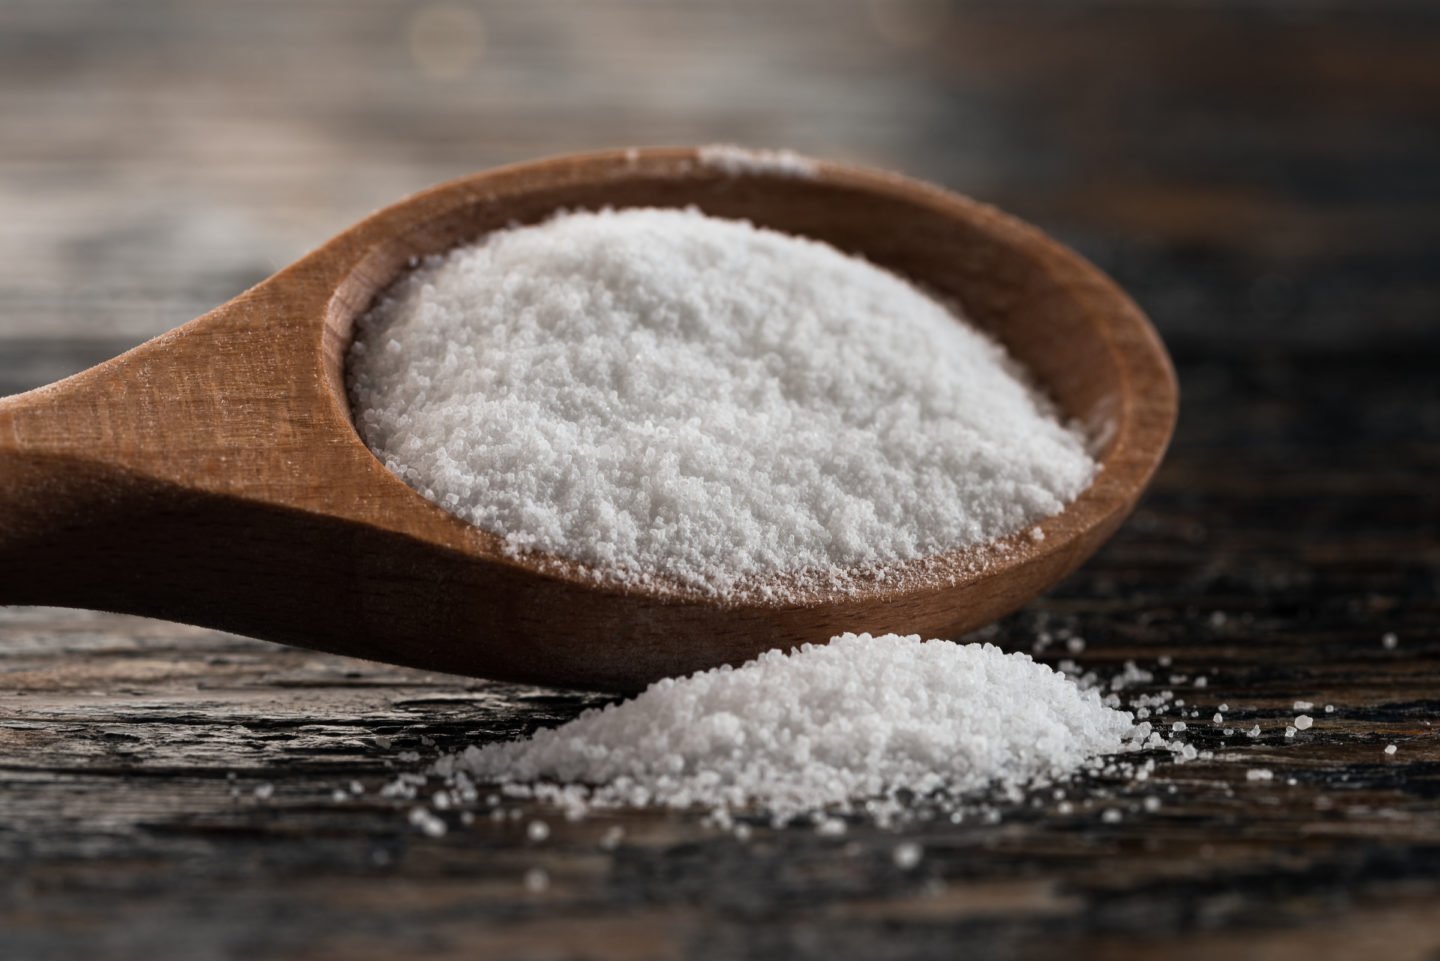 citric acid powder on a wooden spoon